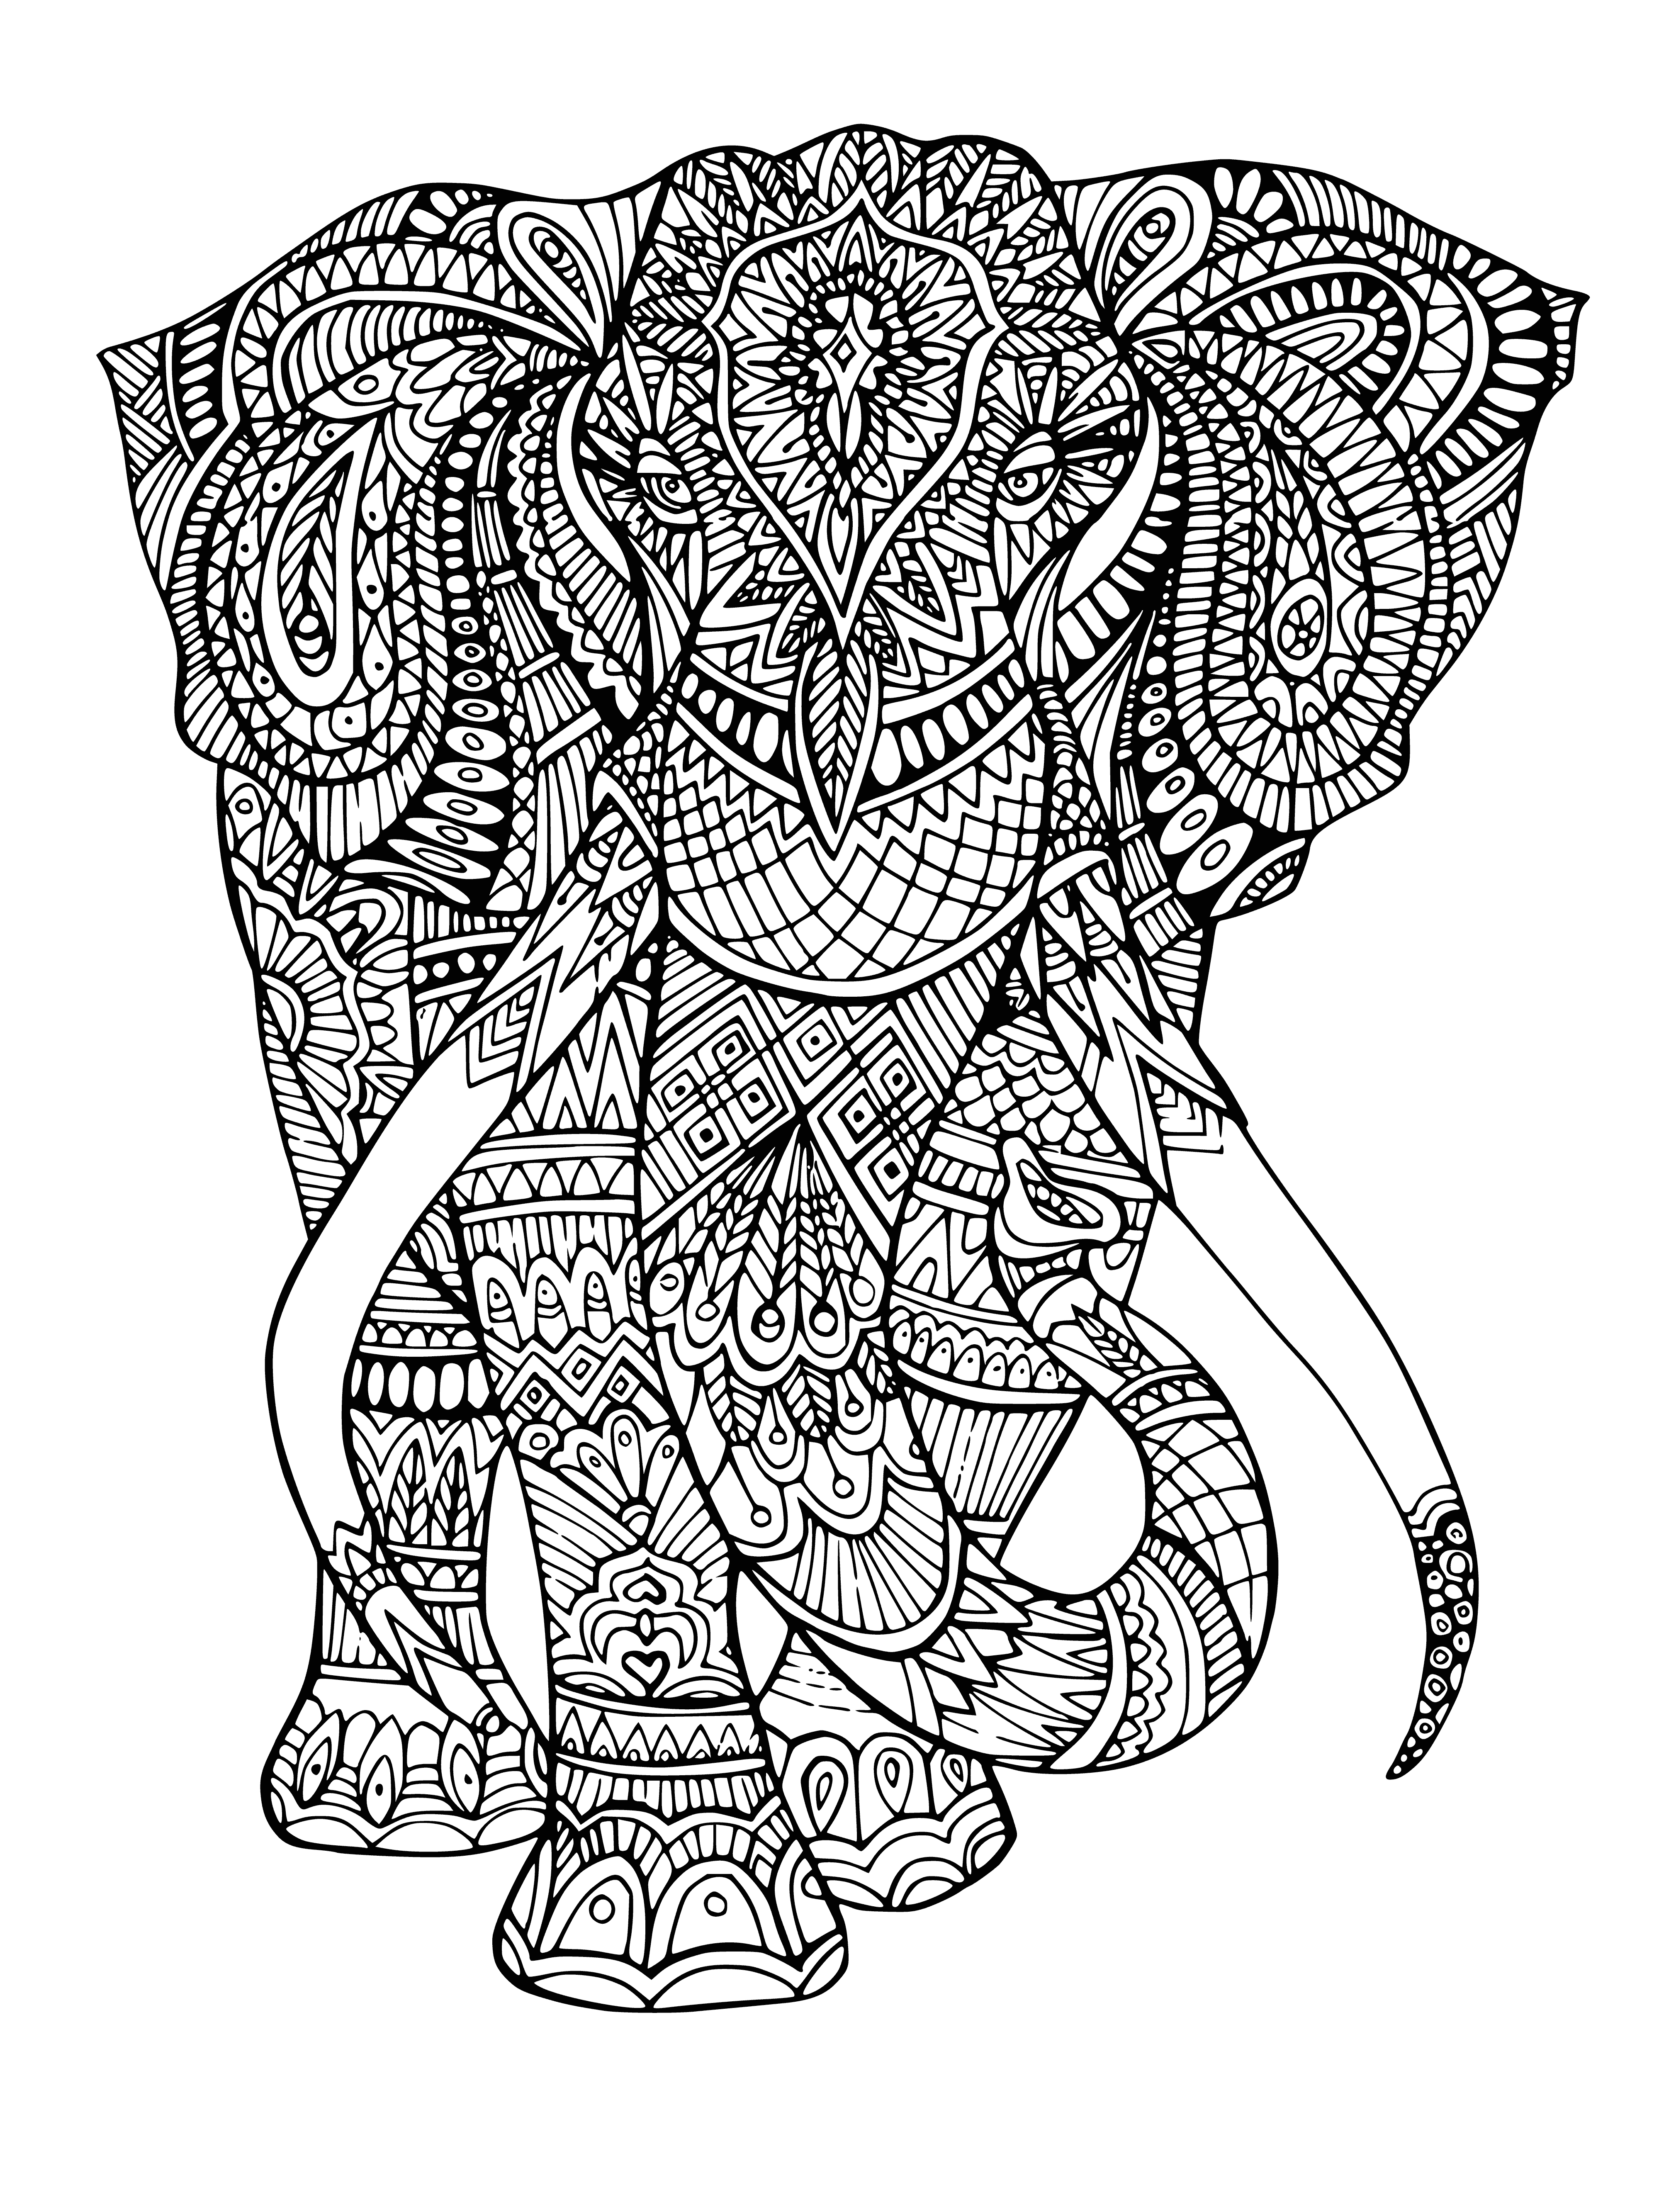 coloring page: A grey elephant stands in a forest, ears large atop a patch of green grass. #elephant #nature